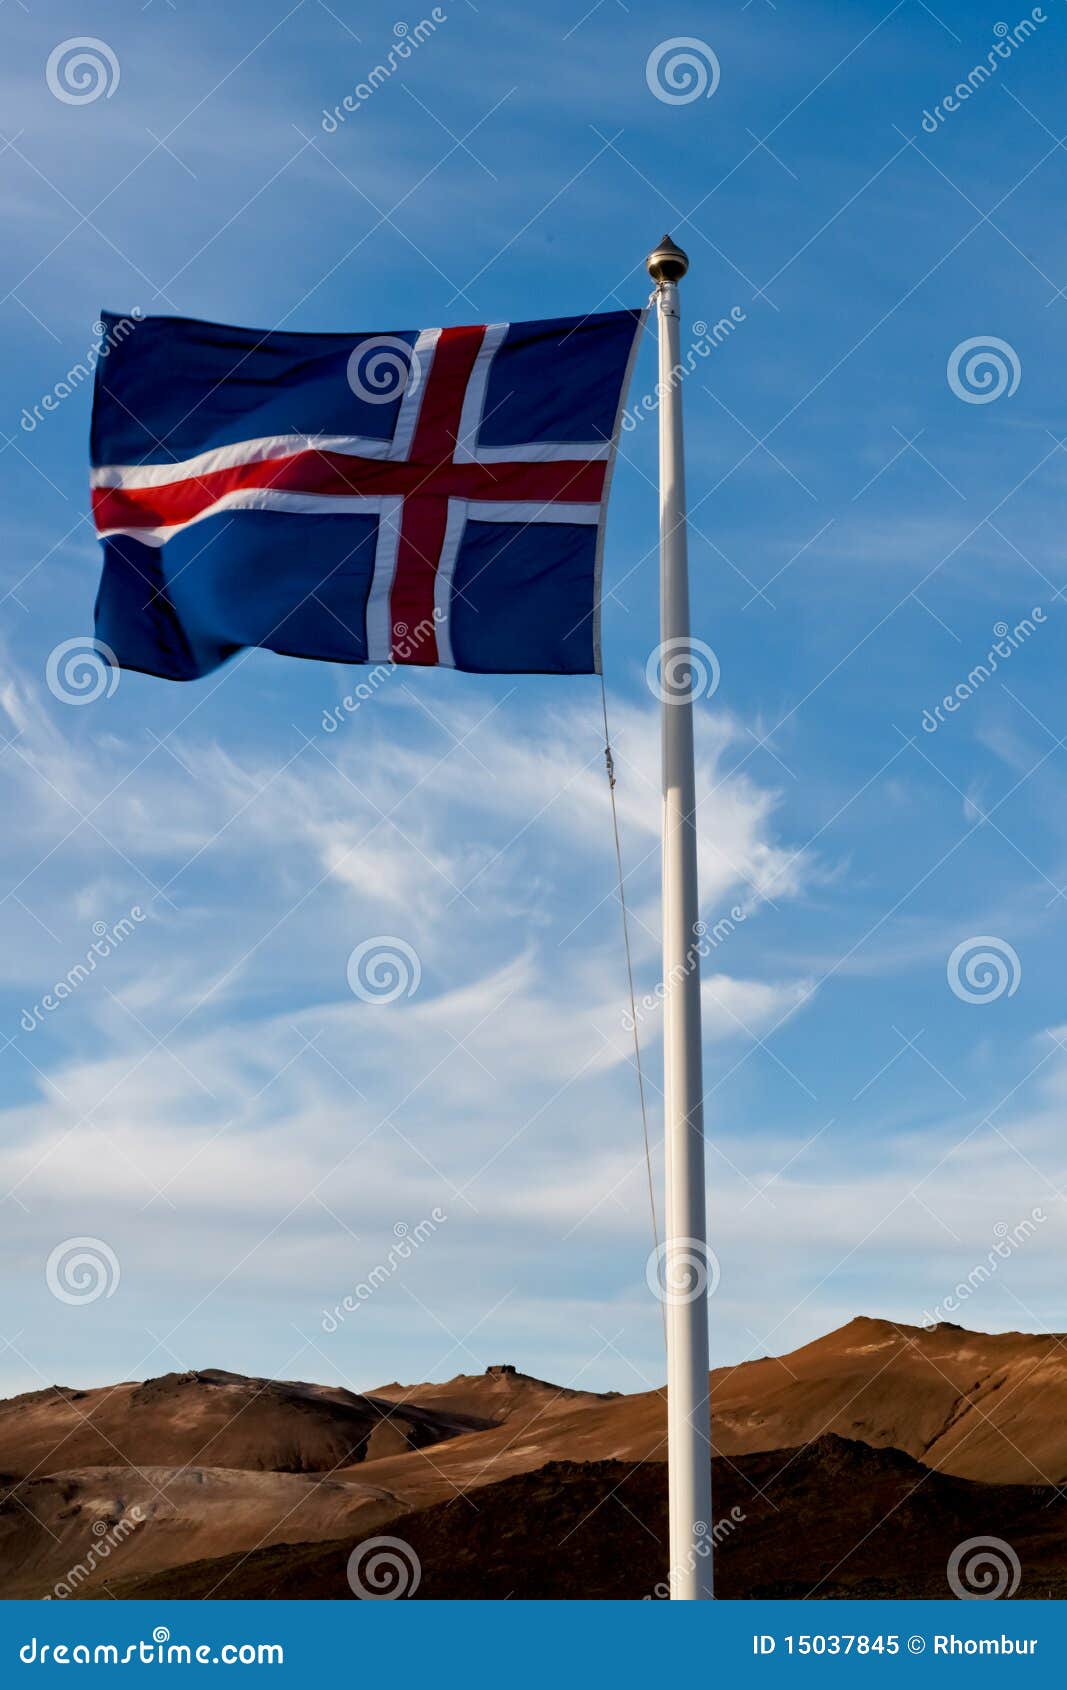 ensign of iceland